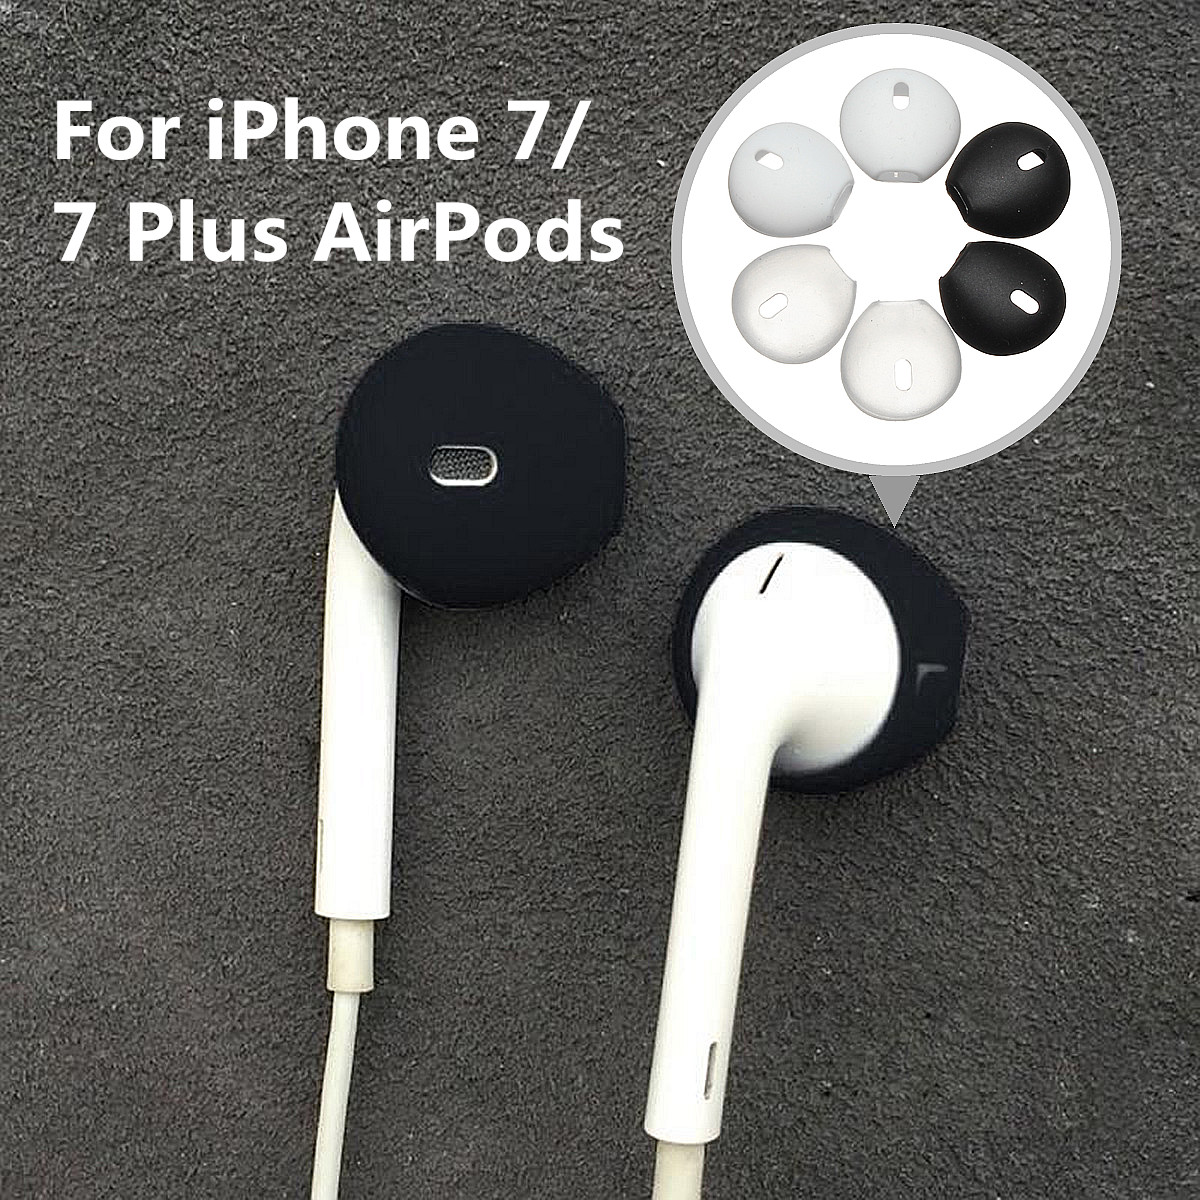 1-Pair-Silicone-In-ear-Headphonee-Earphone-Case-Cover-Cap-Ear-Muffs-for-iPhone-AirPods-EarPods-1131777